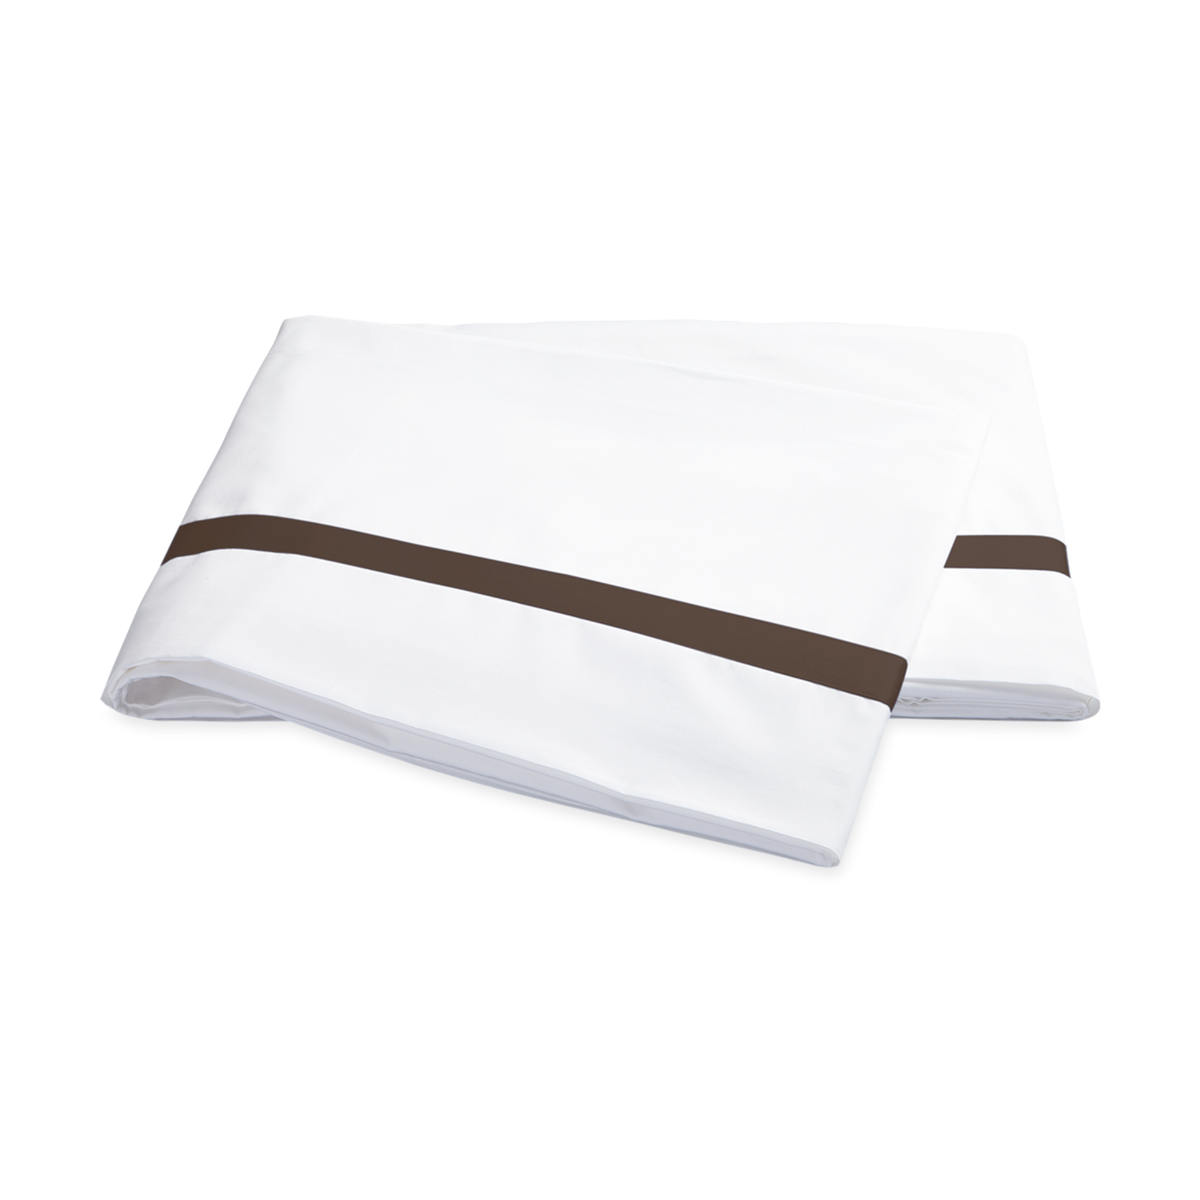 Folded Flat Sheet of Matouk Lowell Bedding Pillowcases in Sable Color